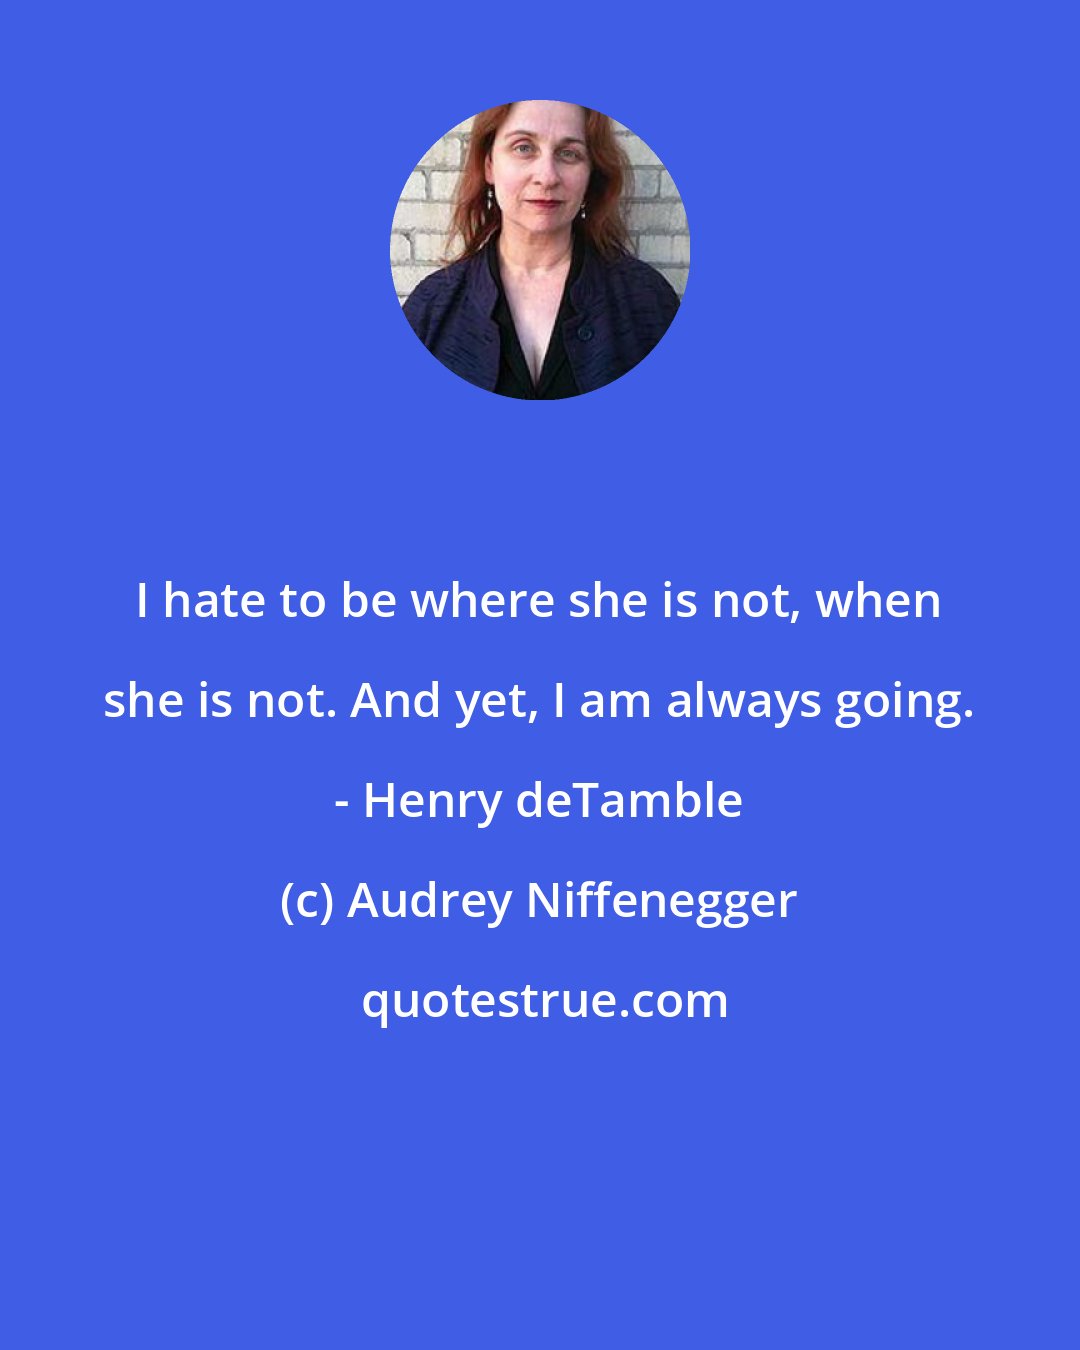 Audrey Niffenegger: I hate to be where she is not, when she is not. And yet, I am always going. - Henry deTamble